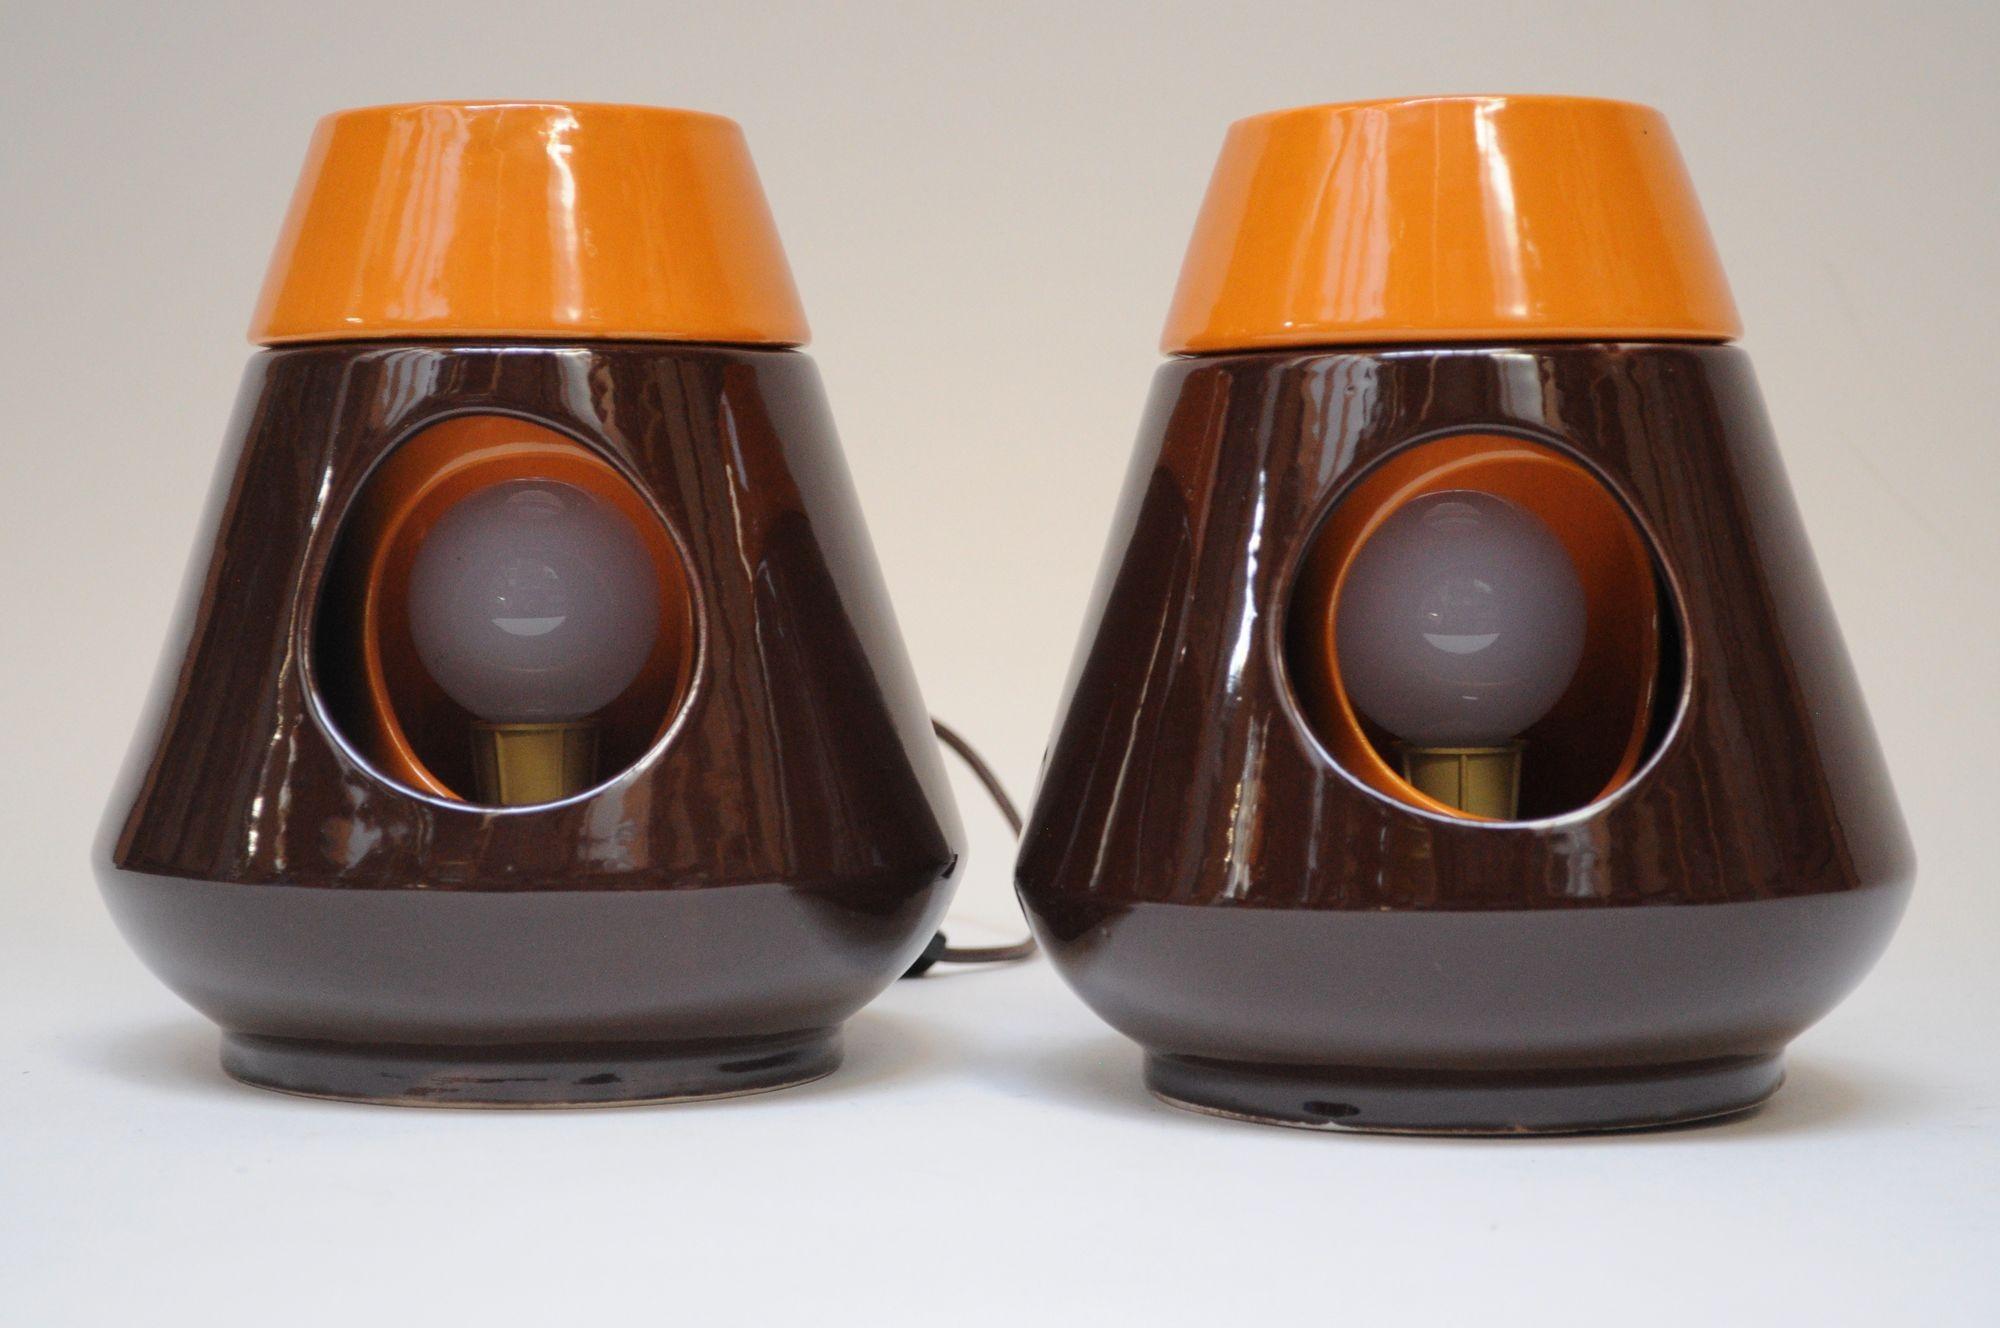 Petite Italian Modernist studio ceramic bedside/table lamps in brown and orange by Ceramiche Capodarco (Capodarco, Italy, ca. 1960s).
Manual rotation of the orange insert allows the light to be adjusted, proving direct of diffused light as